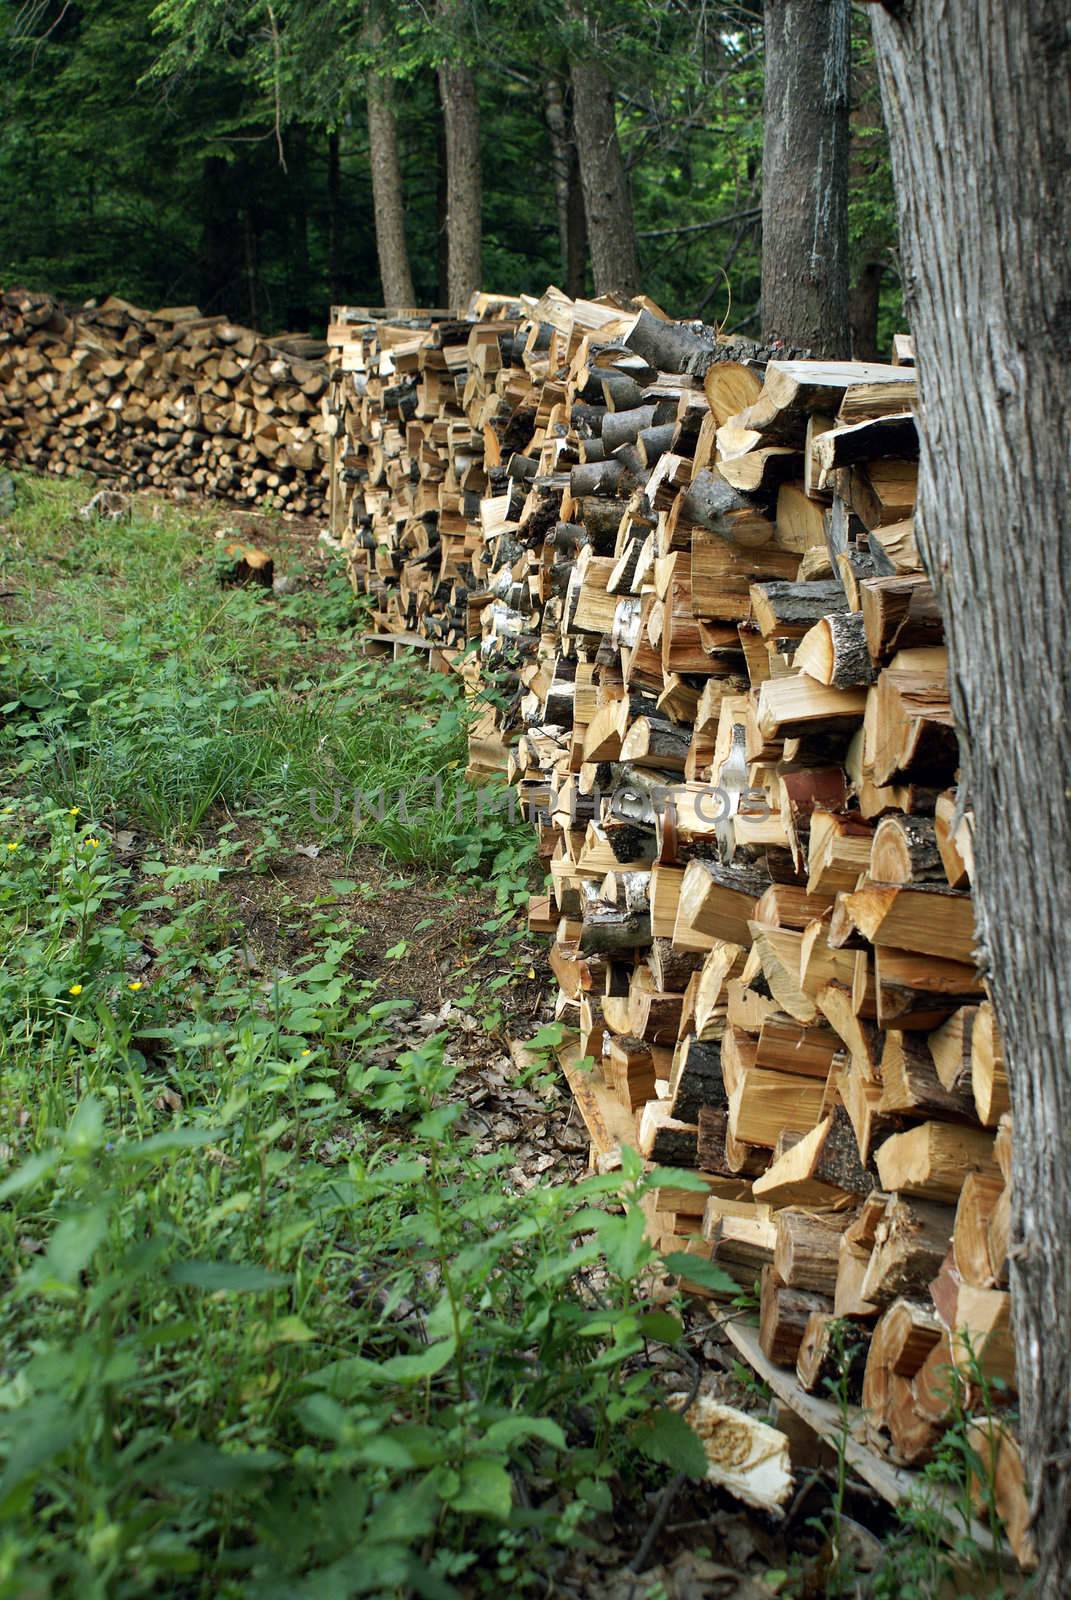 A large stockpile of firewood for heating in the winter months.